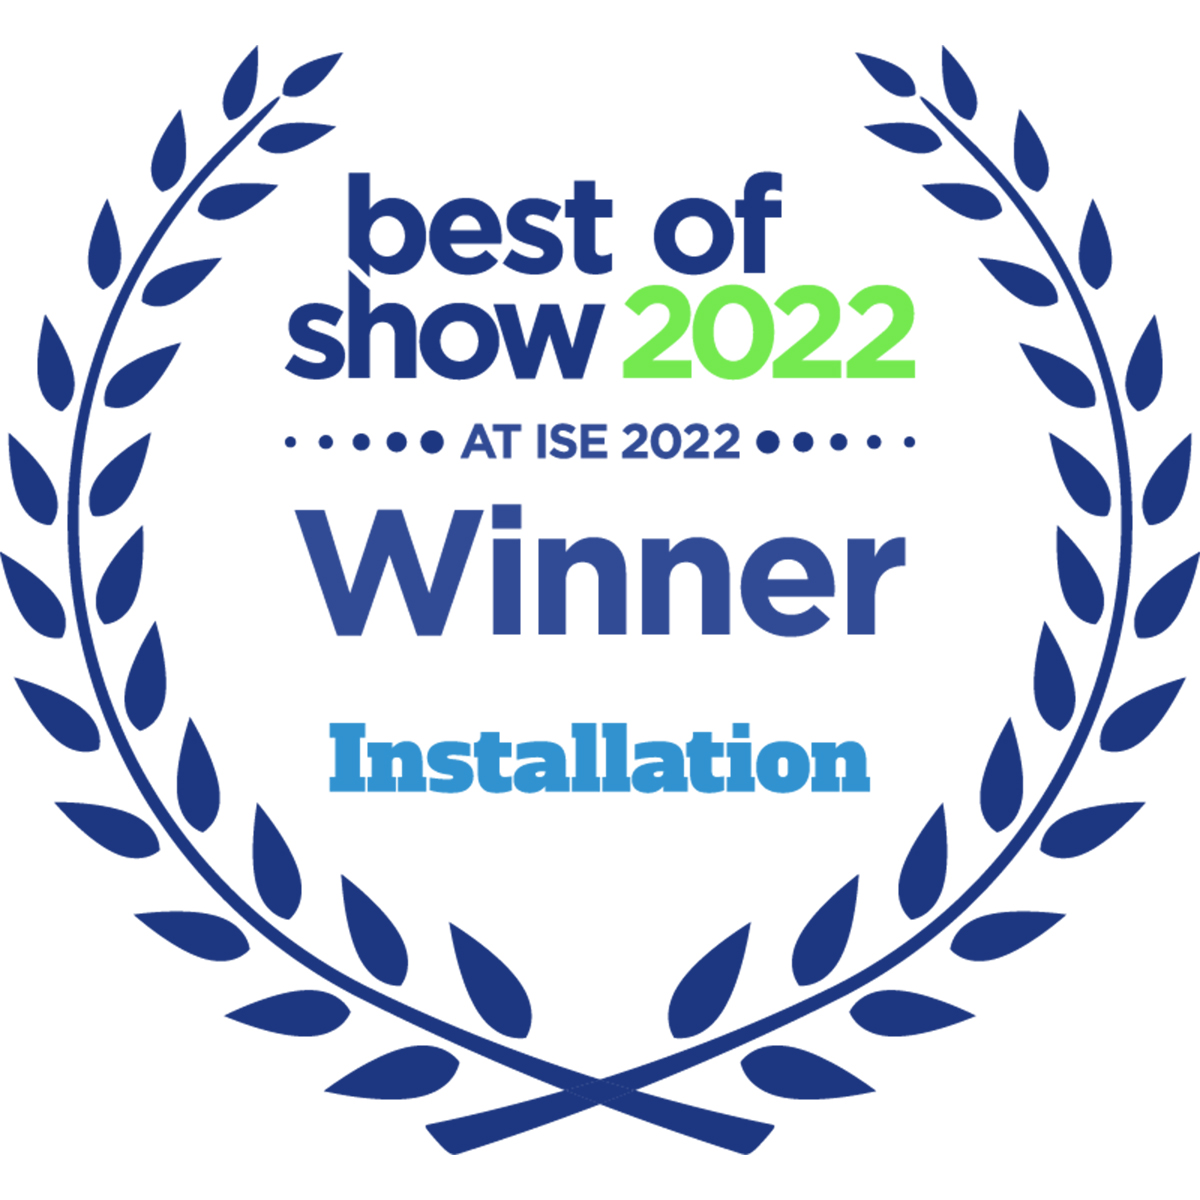 Installation “Best of Show” at ISE